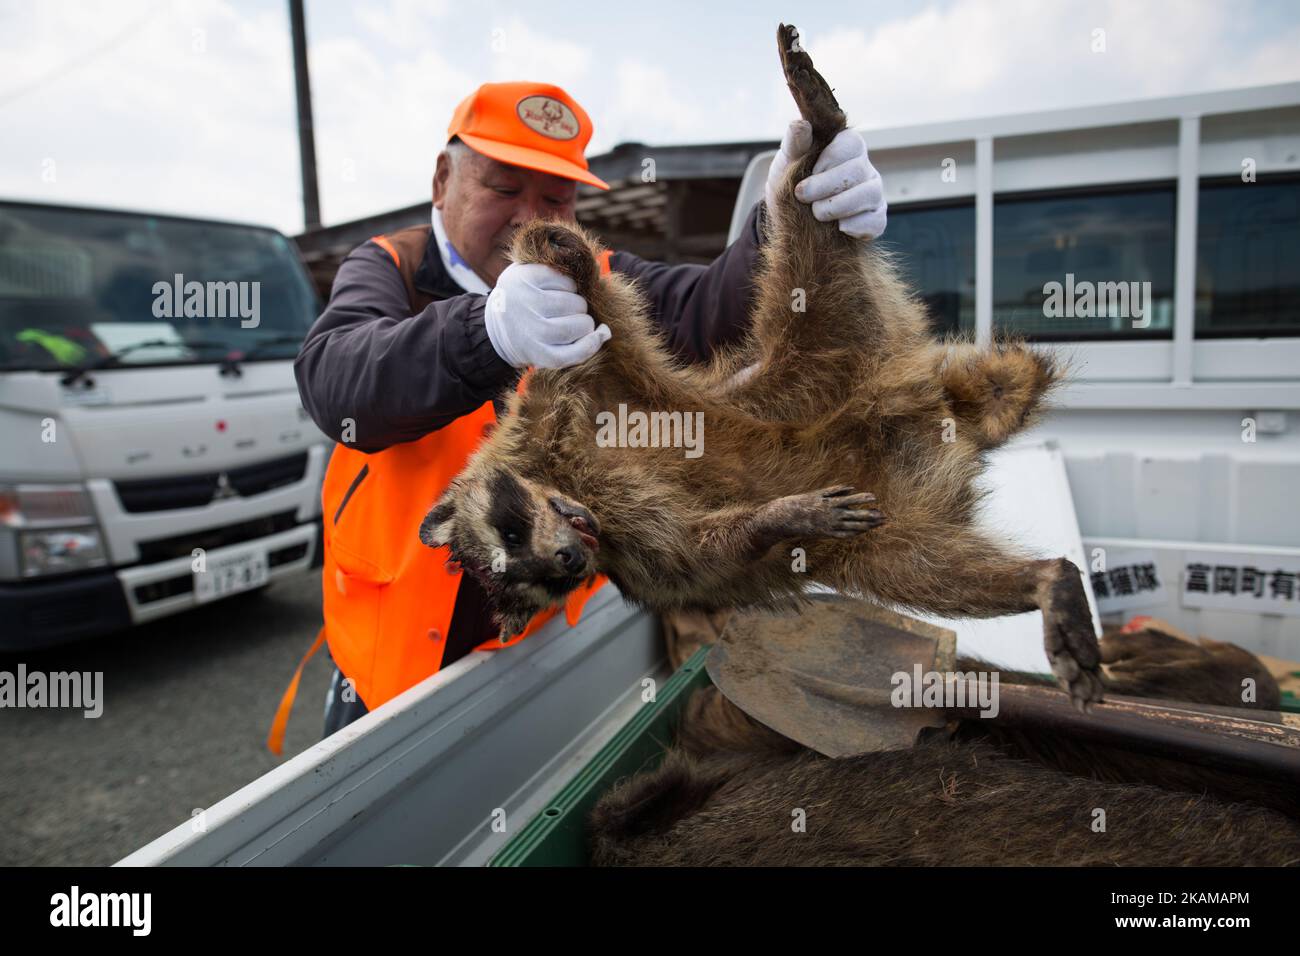 Hunters collect the body of raccoon after being trapped at a residential area near Tokyo Electric Power Co's (TEPCO) tsunami-crippled Fukushima Daiichi nuclear power plant in Tomioka town, Fukushima prefecture, Japan, March 30, 2017. (Photo by Richard Atrero de Guzman/NurPhoto) *** Please Use Credit from Credit Field *** Stock Photo